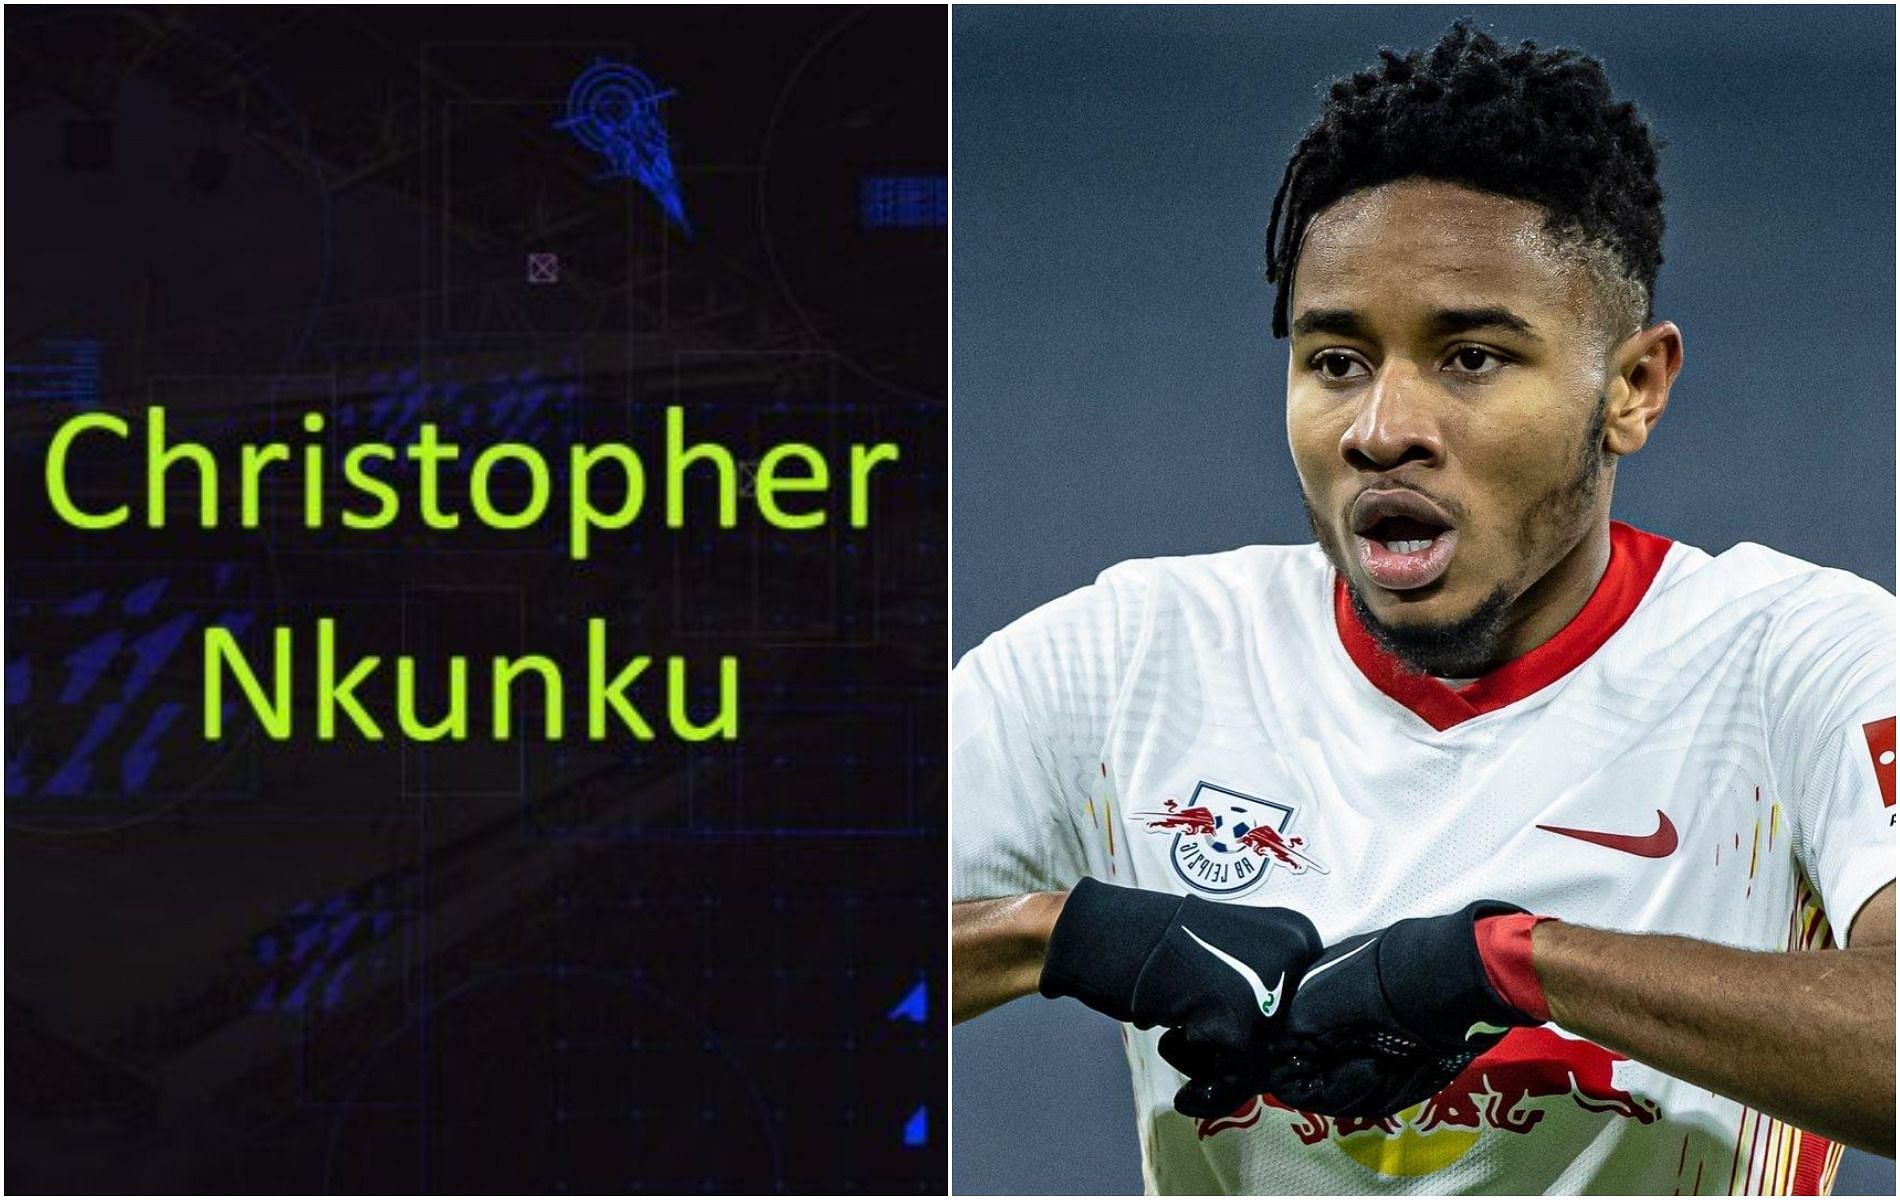 Christopher Nkunku is the latest SBC in FIFA 22